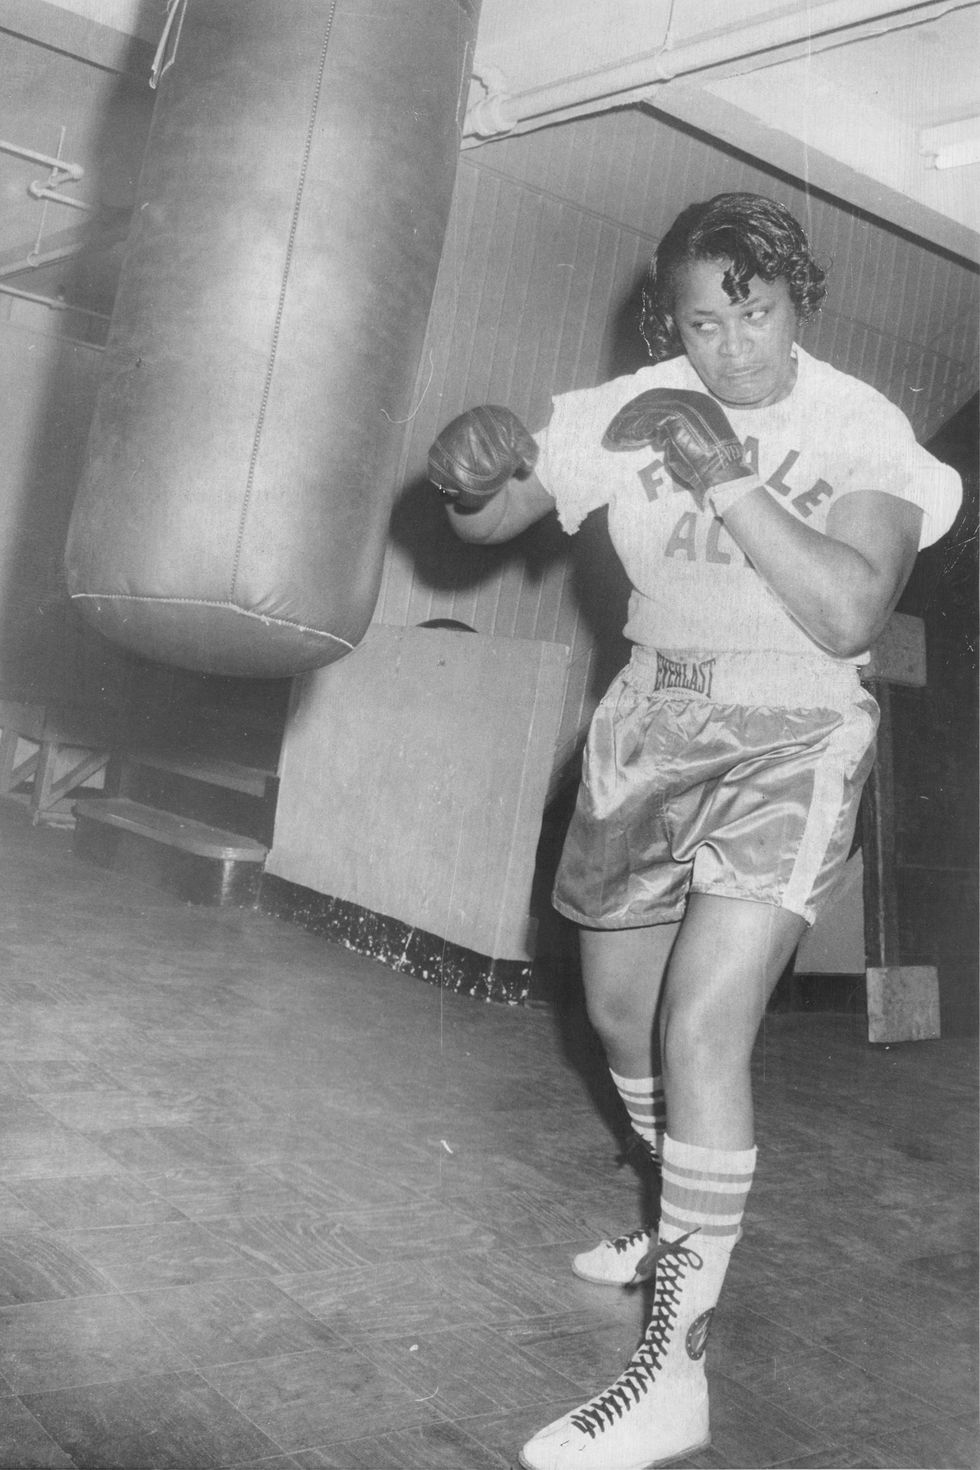 <p>On June 8, 1975, boxer Jackie Tonawanda&nbsp;was the first woman to fight in New York's Madison Square Garden<span class="redactor-invisible-space" data-verified="redactor" data-redactor-tag="span" data-redactor-class="redactor-invisible-space">. She&nbsp;</span>went up against Larry Rodania—and knocked him&nbsp;out in the second round. After that, she&nbsp;was dubbed "the female Muhammad Ali."</p>